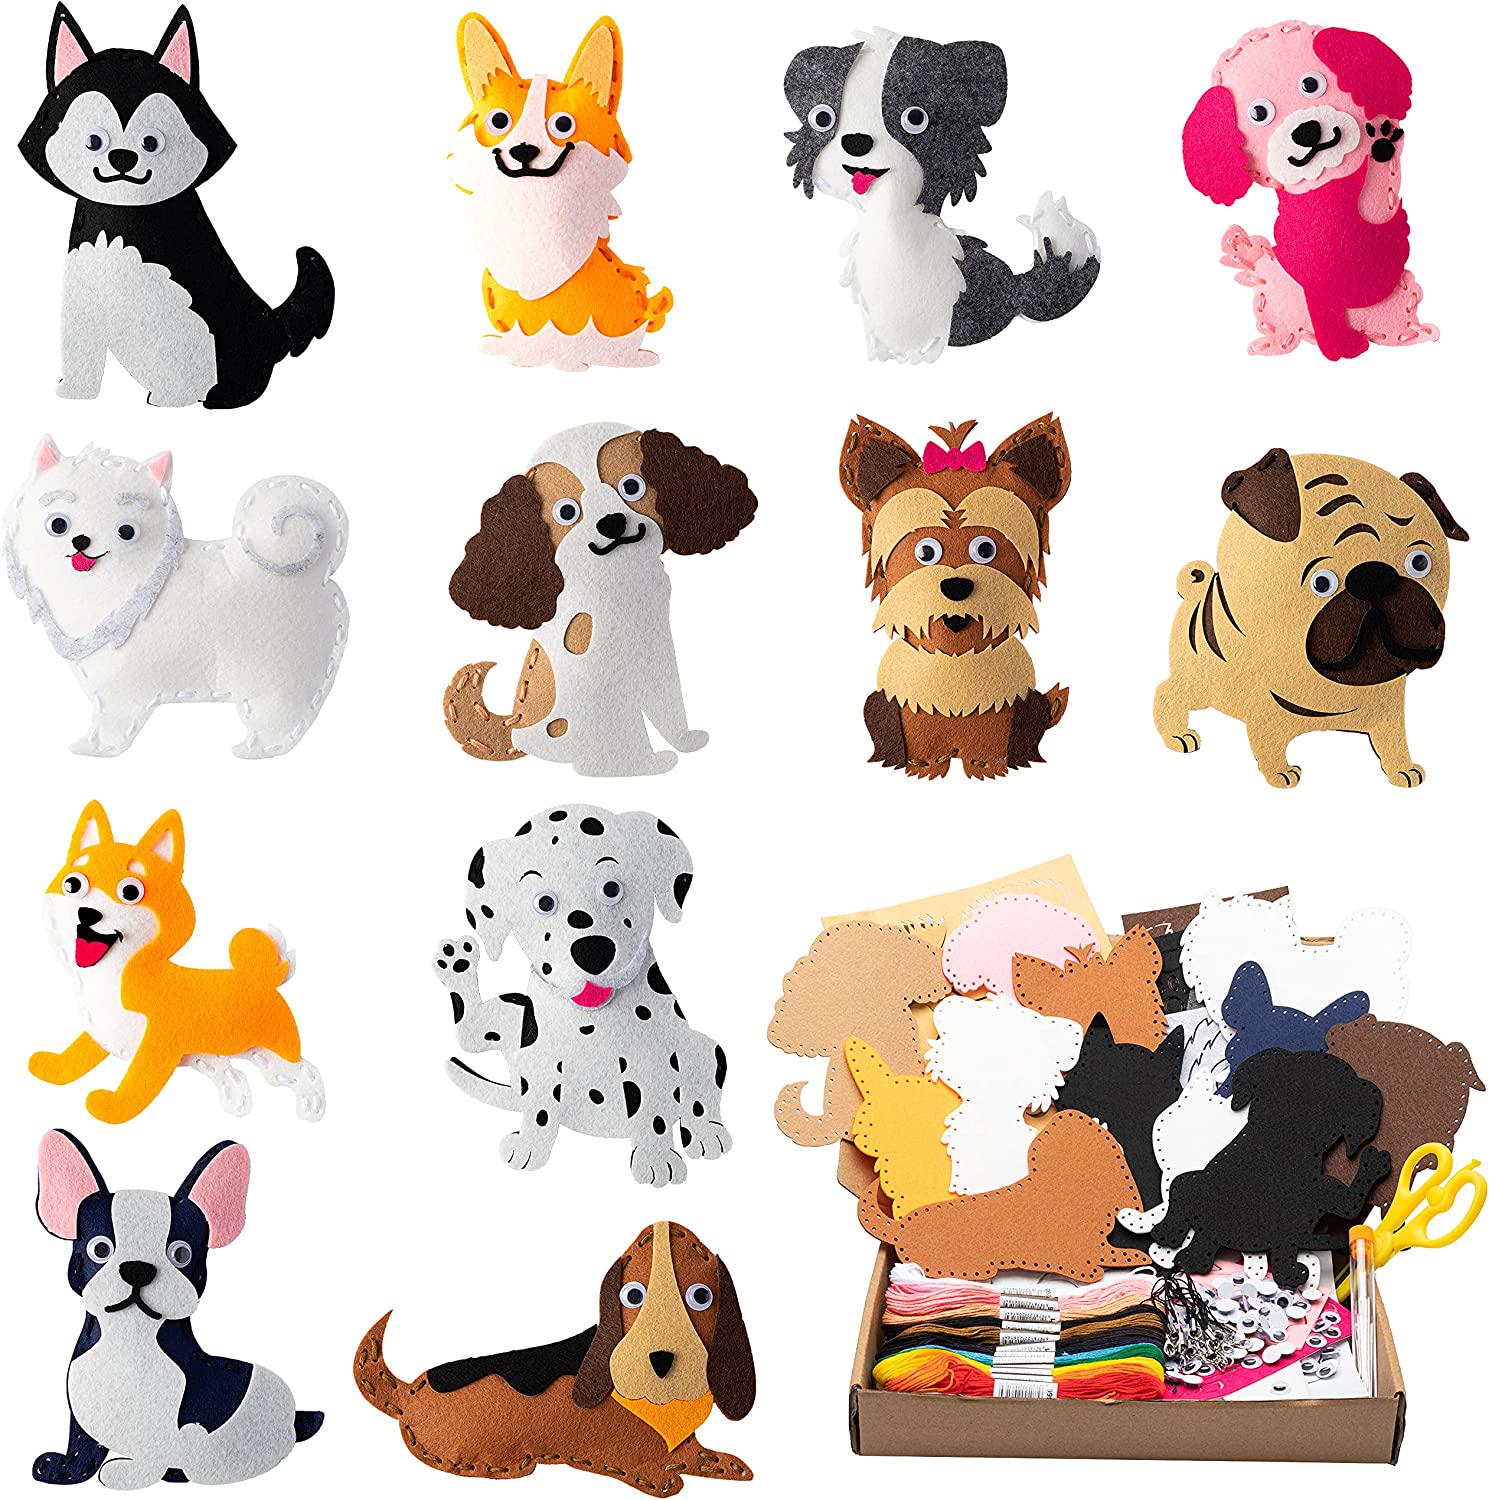 MALLMALL6, MALLMALL6 12Pcs Puppy Dogs Sewing Craft Kit DIY Sew Kits Stuffed Animal Animals Felt Crafts Package Birthday Gifts for Beginners Kid Boys Girls Dog Toys Art Project Games for Family Game Night